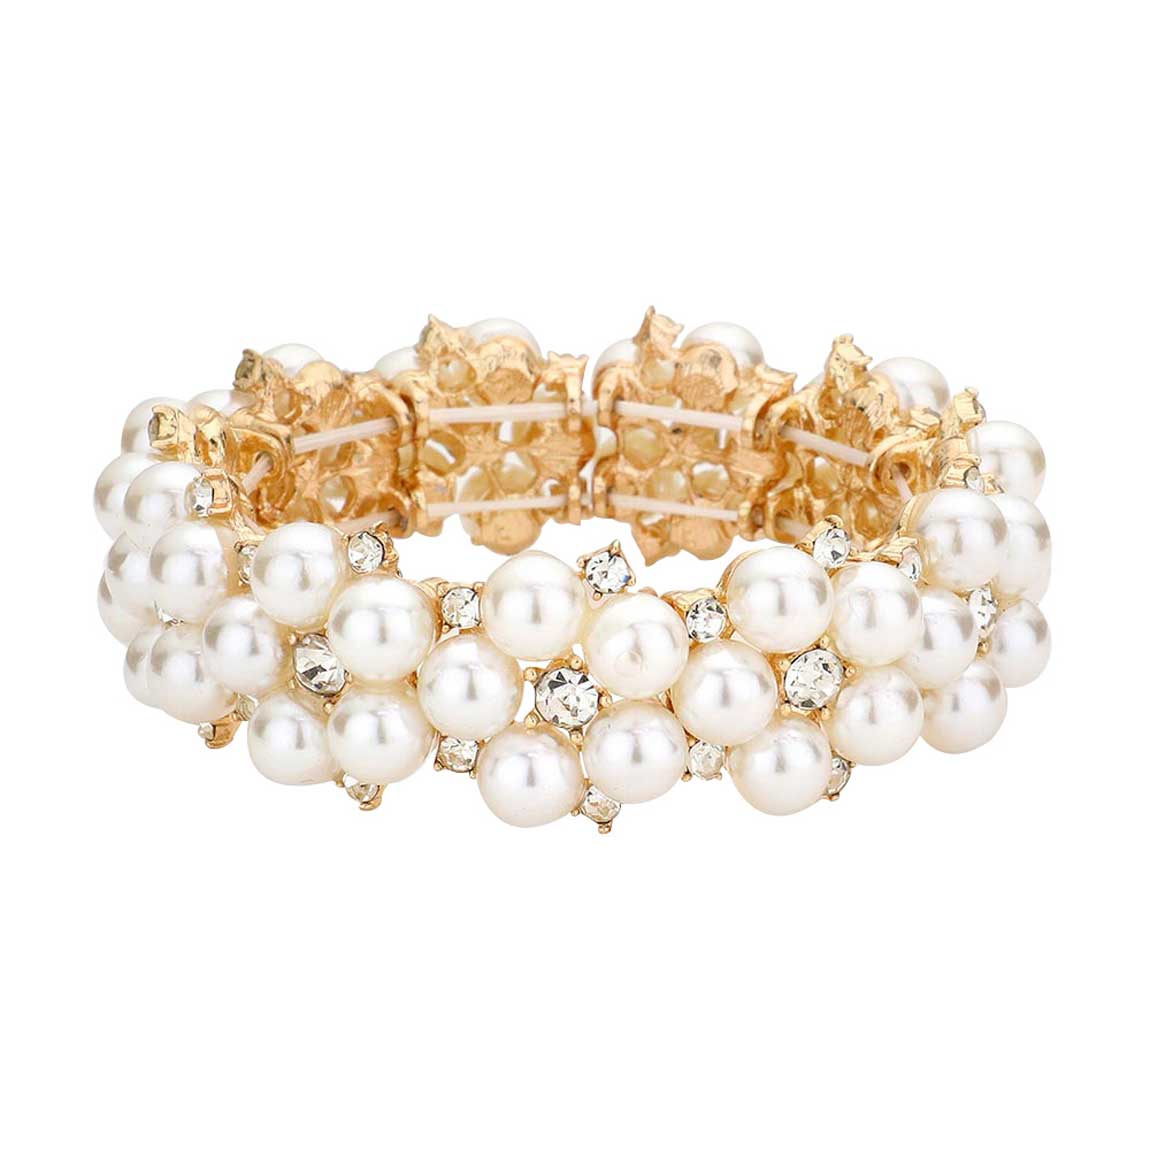 Gold Pearl Flower Cluster Link Stretch Bracelet, is the perfect reflection of absolute royalty and perfect class that will amp up your look and drags everyone's attention on special occasions. Show your confidence and trendy choice with this beauty and complete your ensemble with a luxurious look. Perfect for adding just the right amount of shimmer & shine and a touch of class to special events.